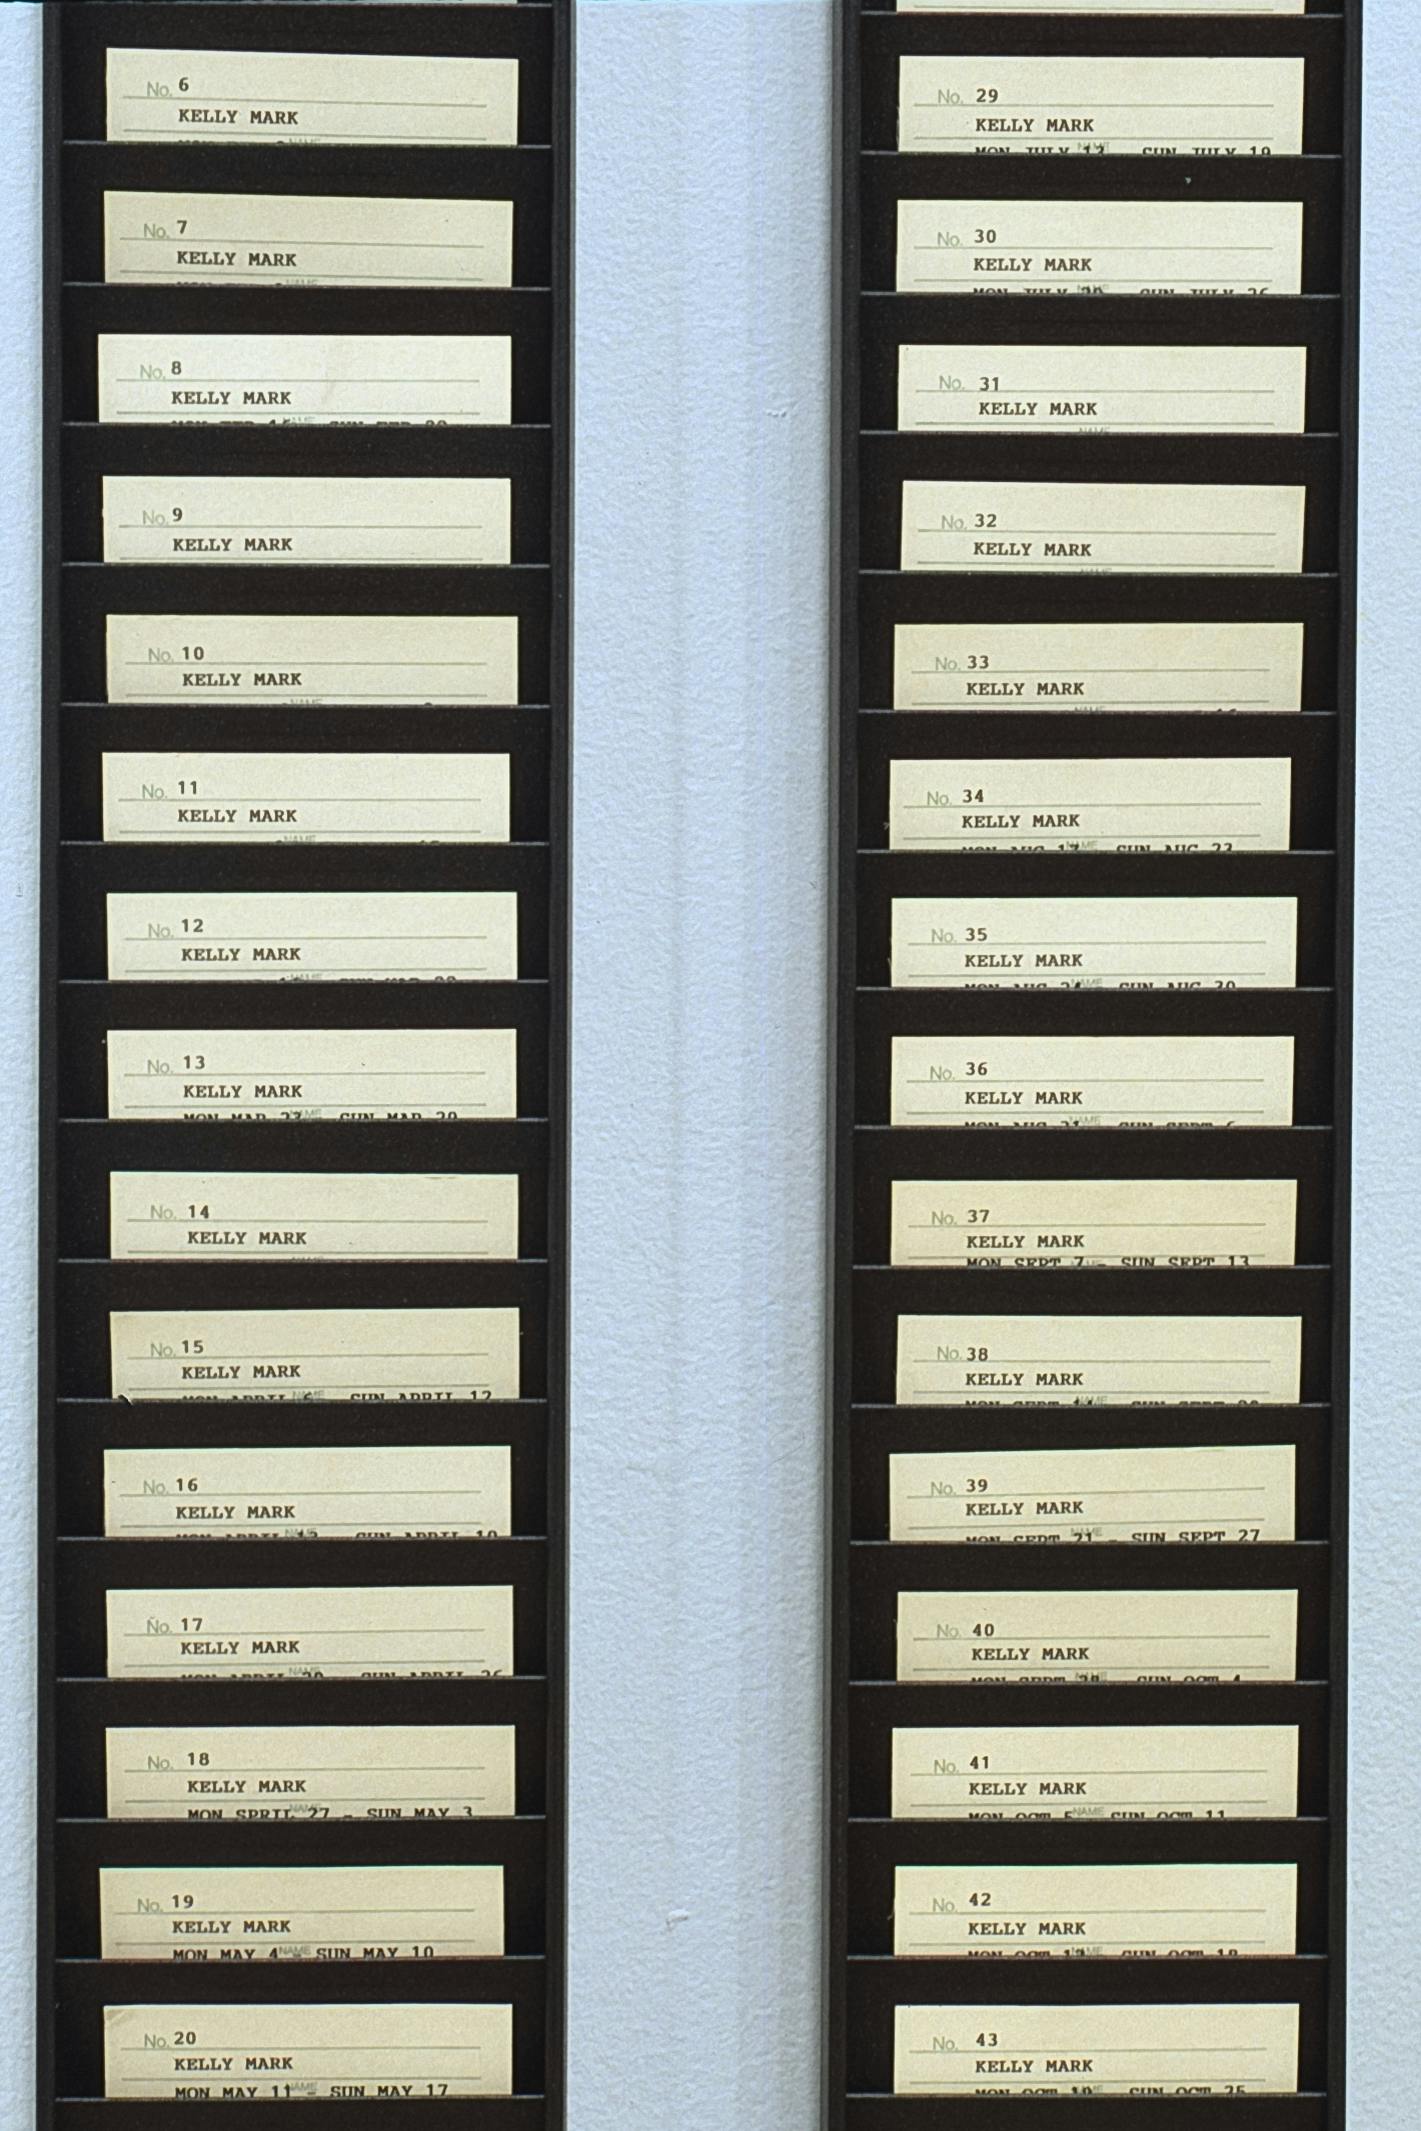 This is a close-up view of black steel racks installed in the gallery. The racks store a number of time cards. The name of the artist, Kelly Mark is typed on each of those time cards. 